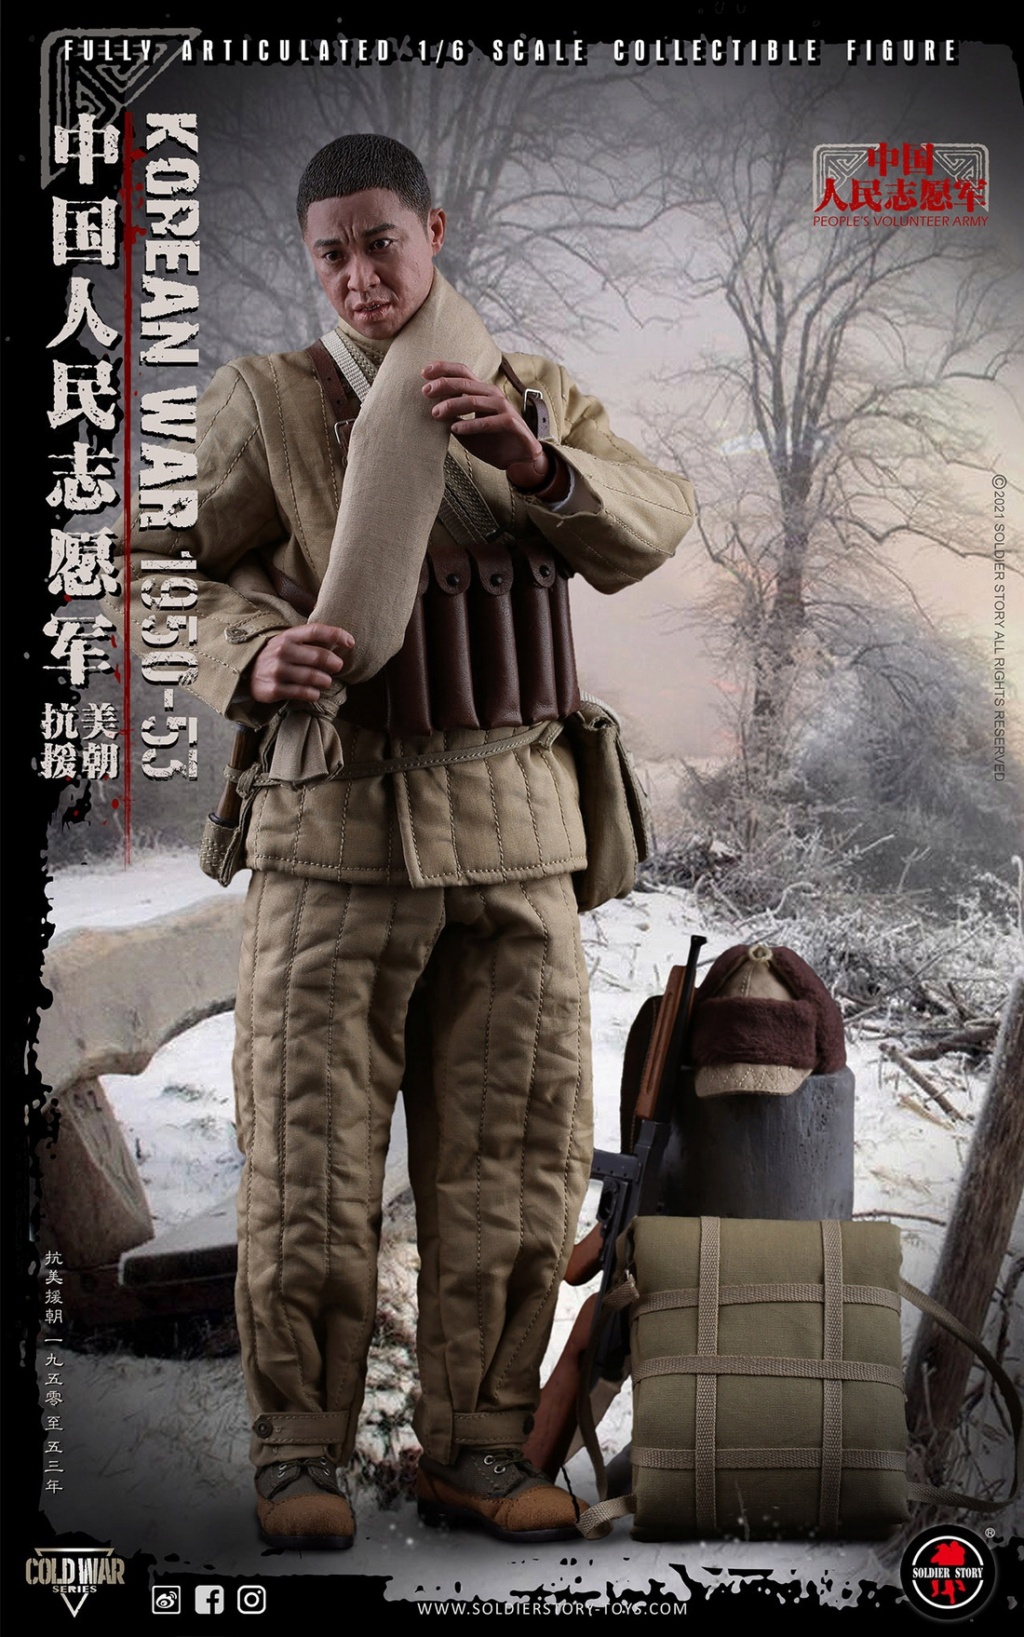 Soldierstory - NEW PRODUCT: SOLDIER STORY: 1/6 Chinese People’s Volunteers 1950-53 Collectible Action Figure (#SS-124) 39254010